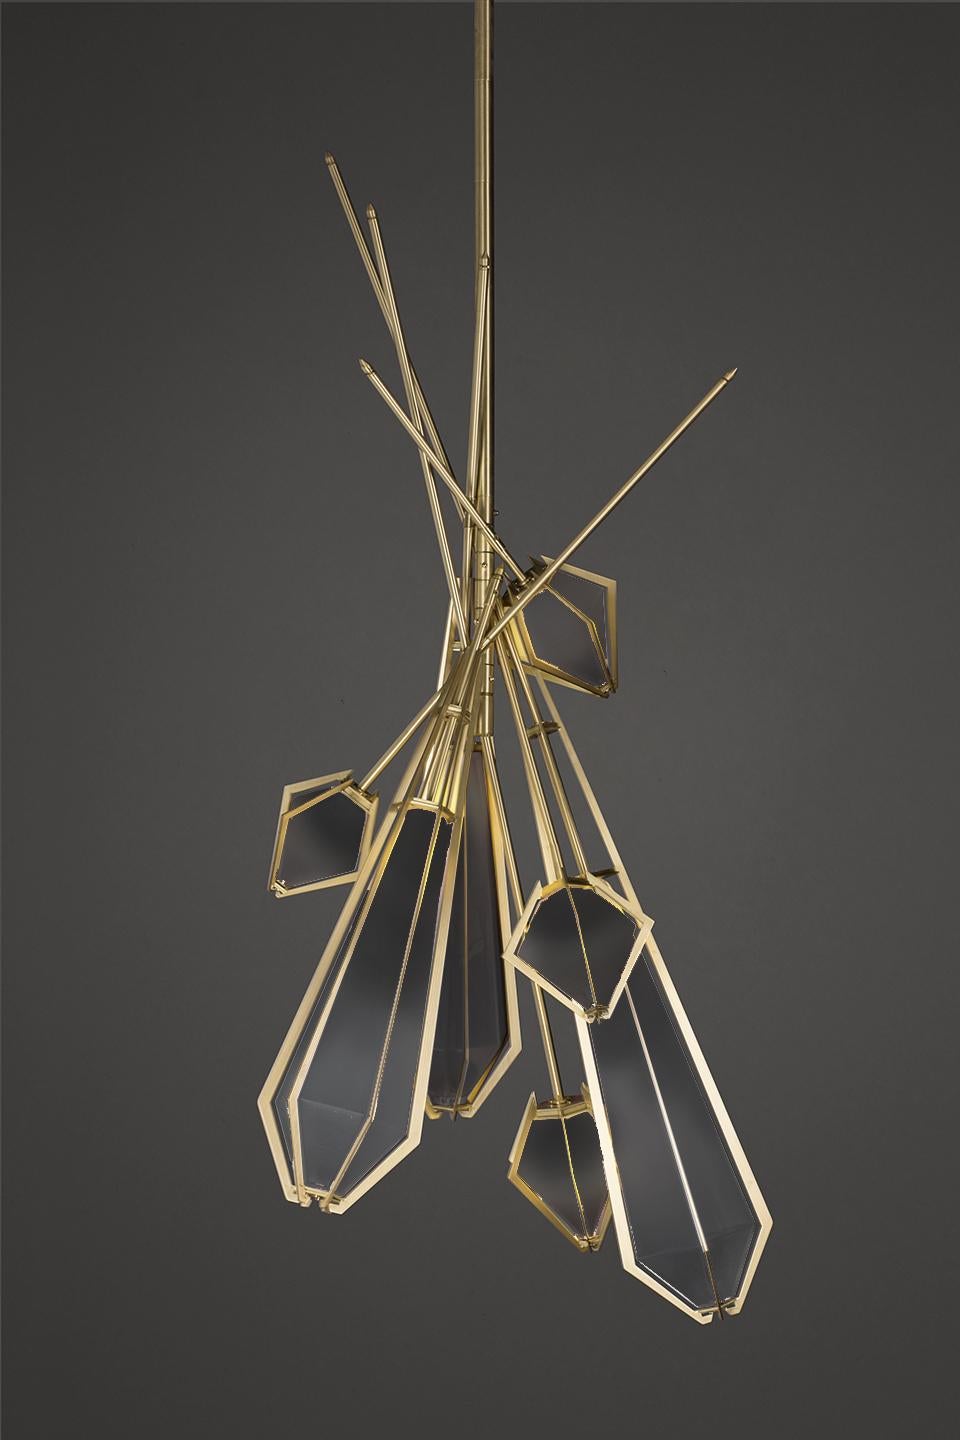 Harlow dried flowers is an elegant sculptural light fixture inspired by jewelry design featuring a mold-blown glass gem in a chic metallic setting to create an asymmetrical starburst of light. Harlow is available in various color ways, and held in a